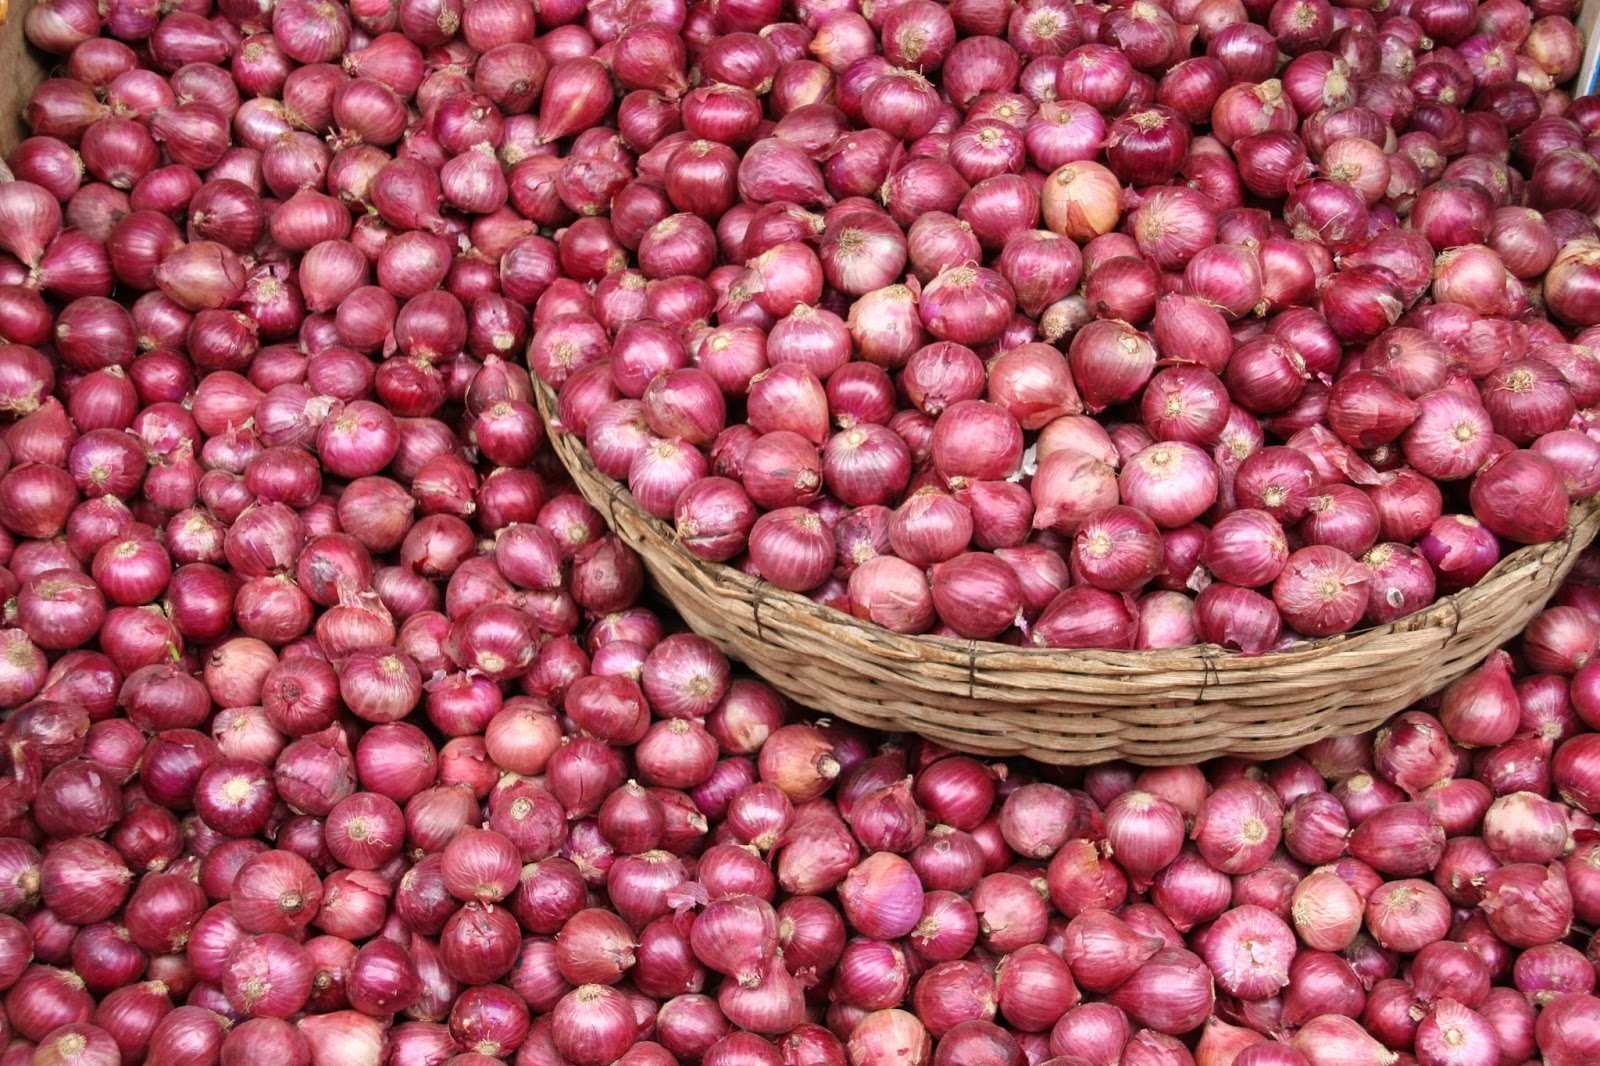 rise in onion prices.